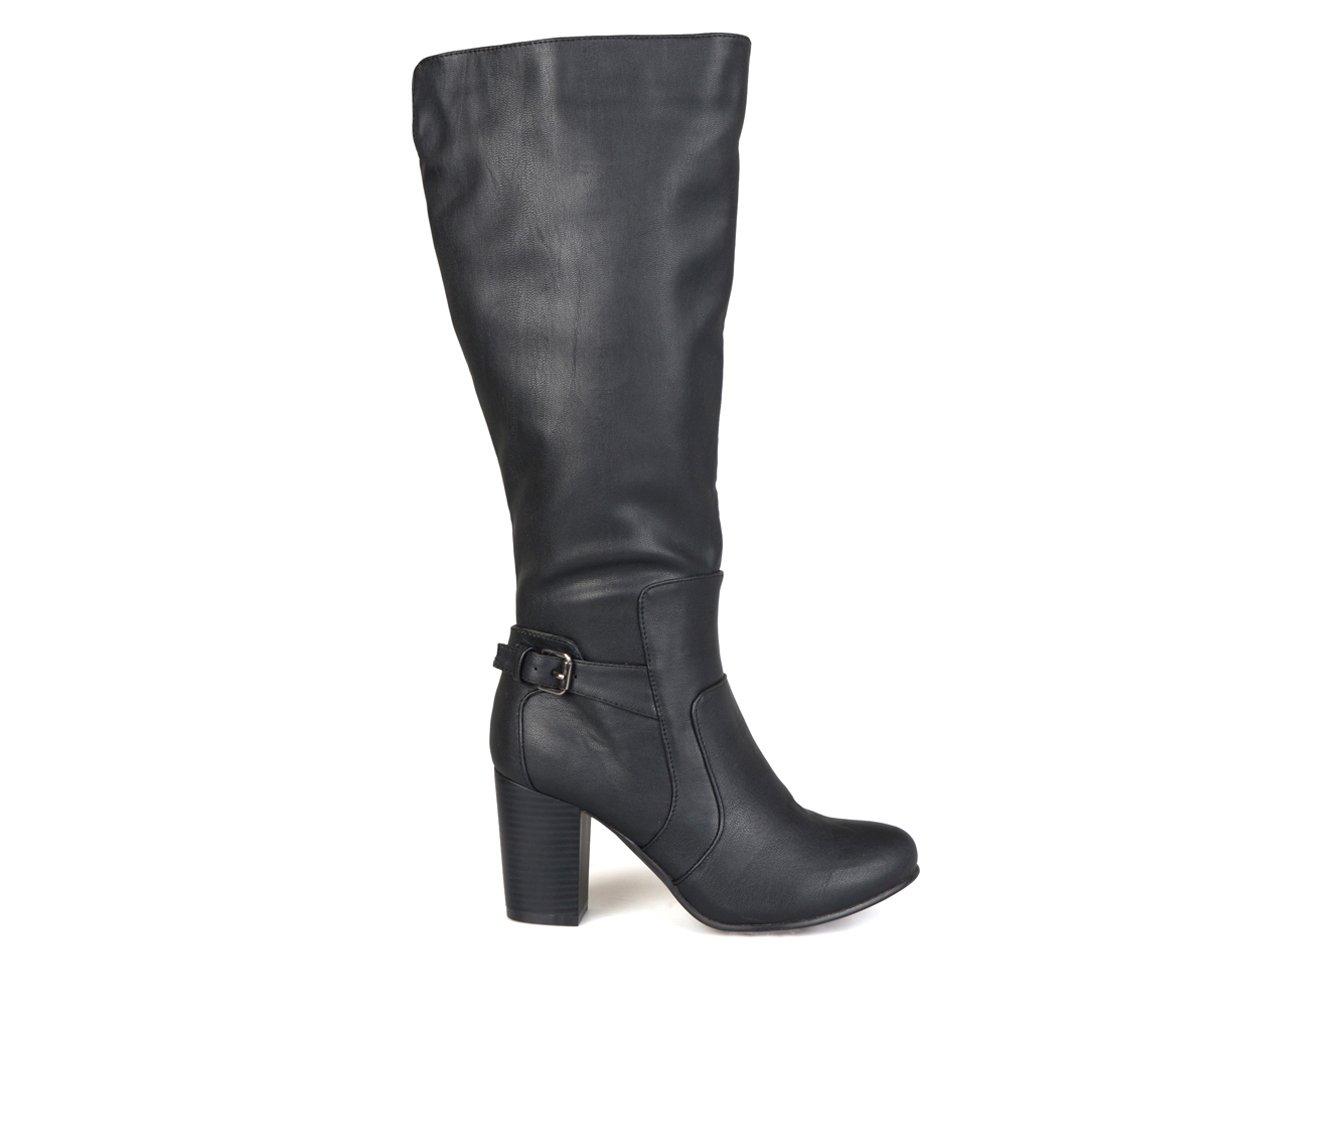 Women's Journee Collection Carver Wide Calf Knee High Boots | Shoe Carnival